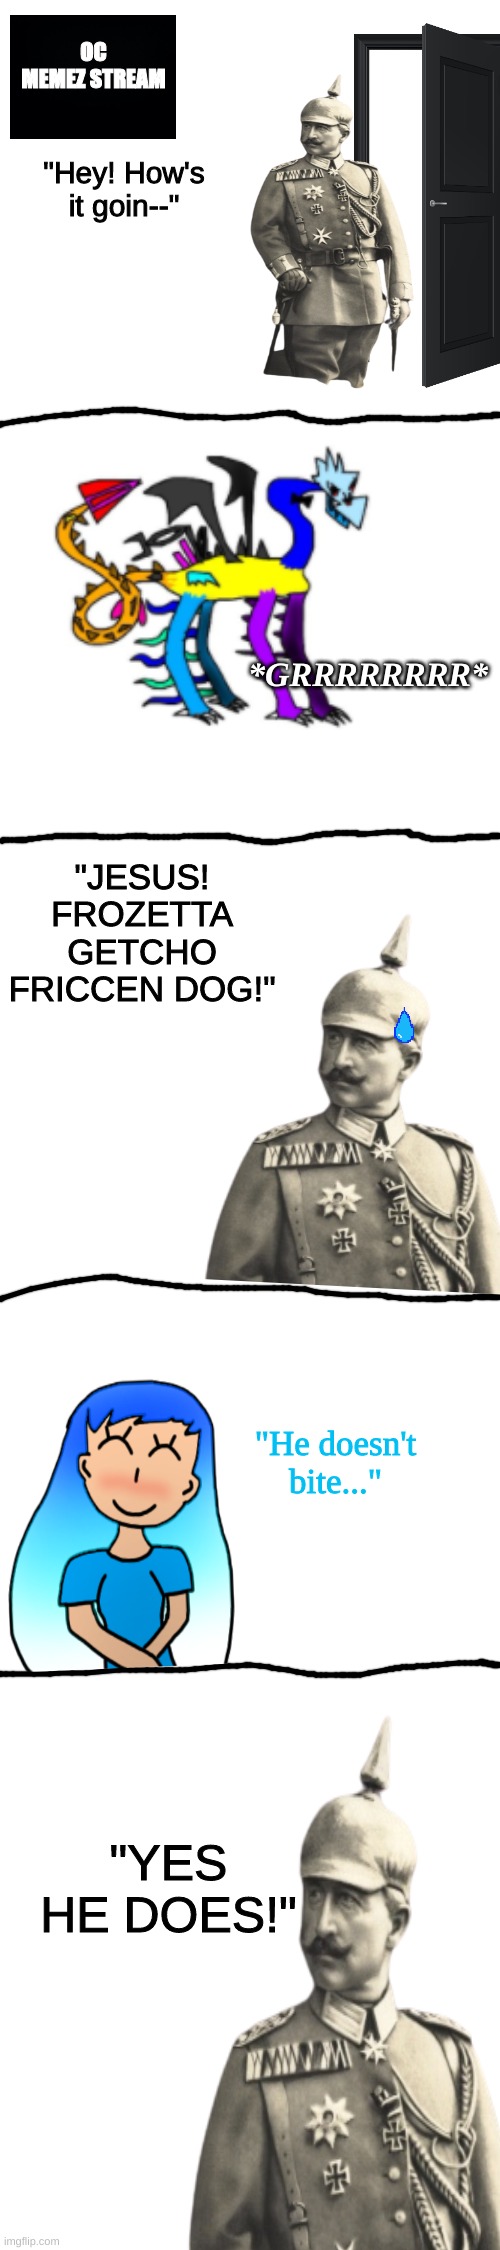 Random ass idea + a few minutes minutes of work = this thing I made... | OC MEMEZ STREAM; "Hey! How's it goin--"; *GRRRRRRRR*; "JESUS! FROZETTA GETCHO FRICCEN DOG!"; "He doesn't bite..."; "YES HE DOES!" | image tagged in random,vine,meme,ideas | made w/ Imgflip meme maker